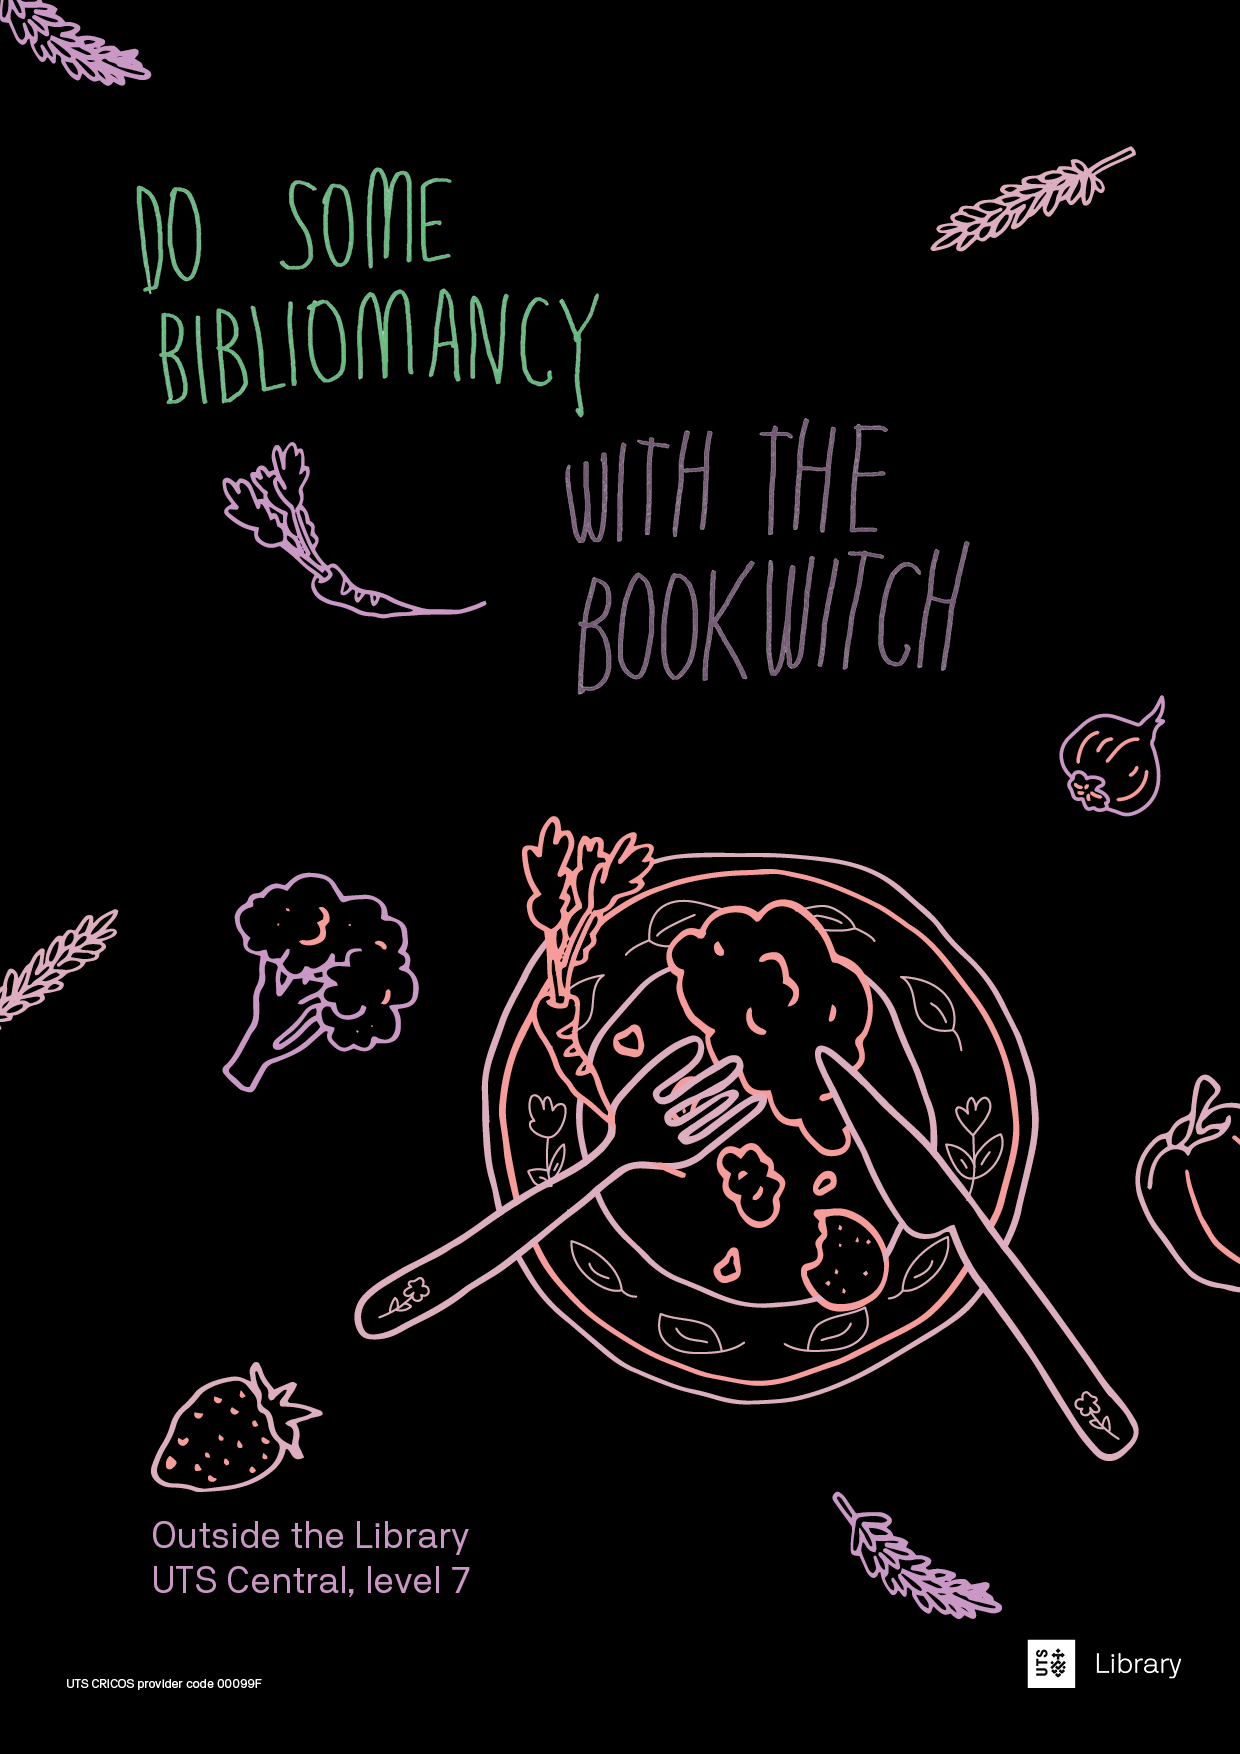 Black poster with green and purple handwritten text 'Do dome bibliomancy with the book witch'. Pink and purple illustrations of a dinner plate with food on it sits underneath, with drawings of various fruits and vegetables scattered around the page